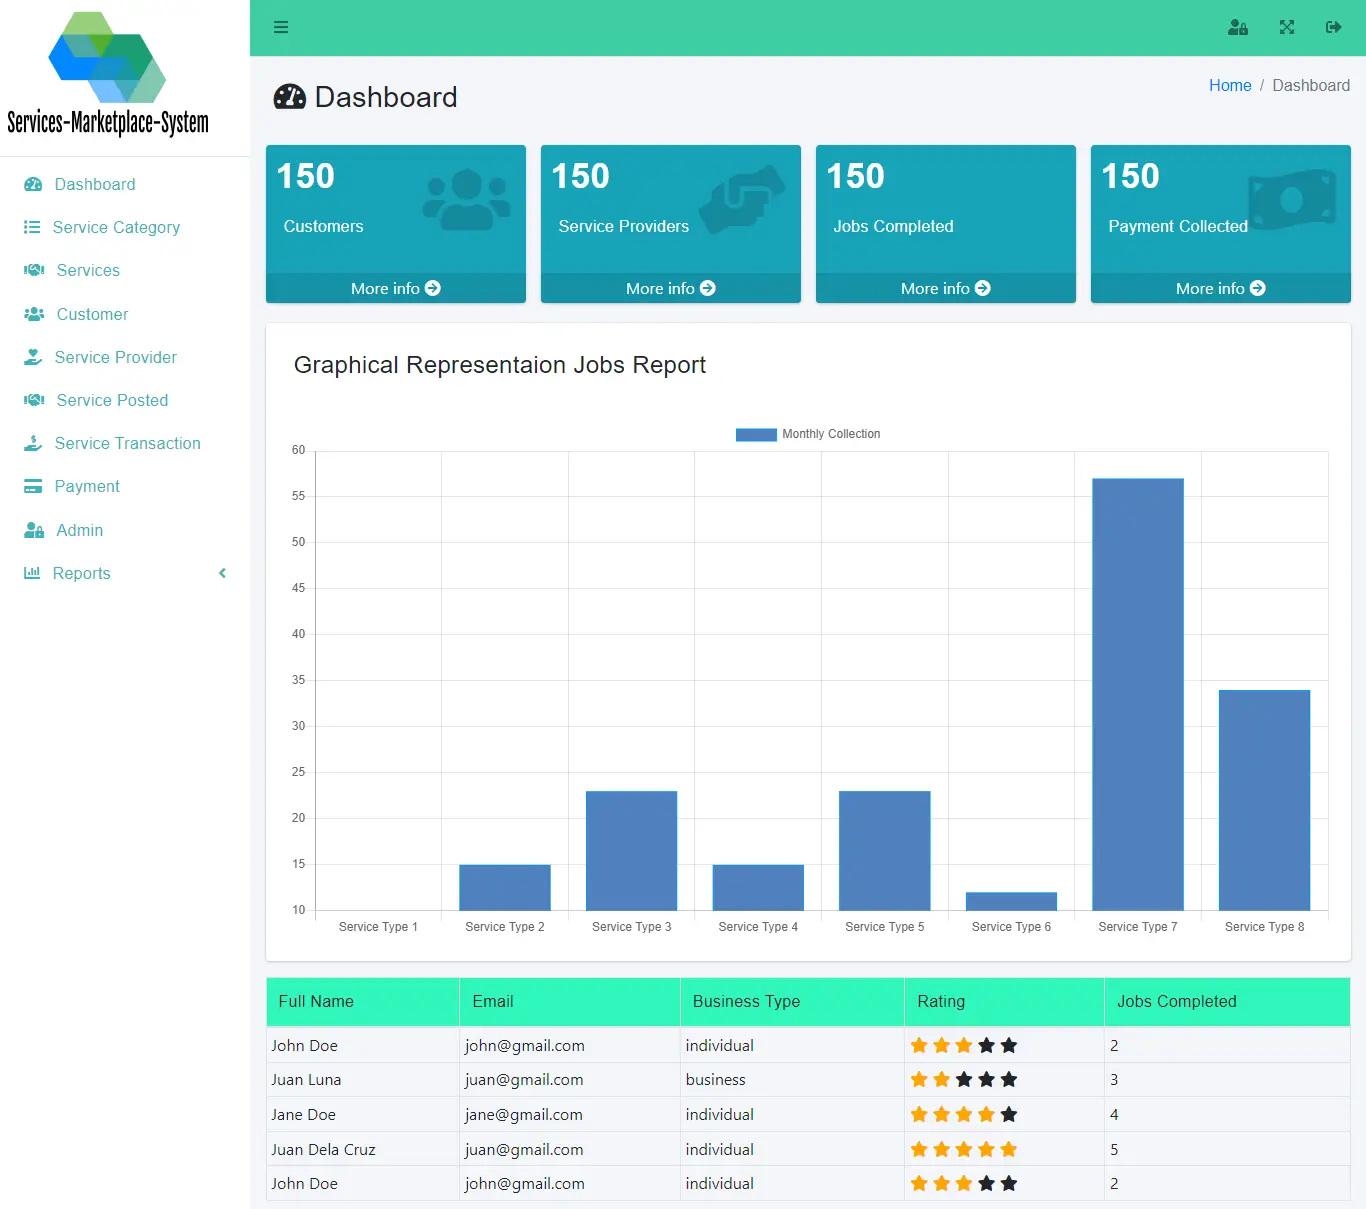 Services Marketplace System Free Download - Admin Dashboard